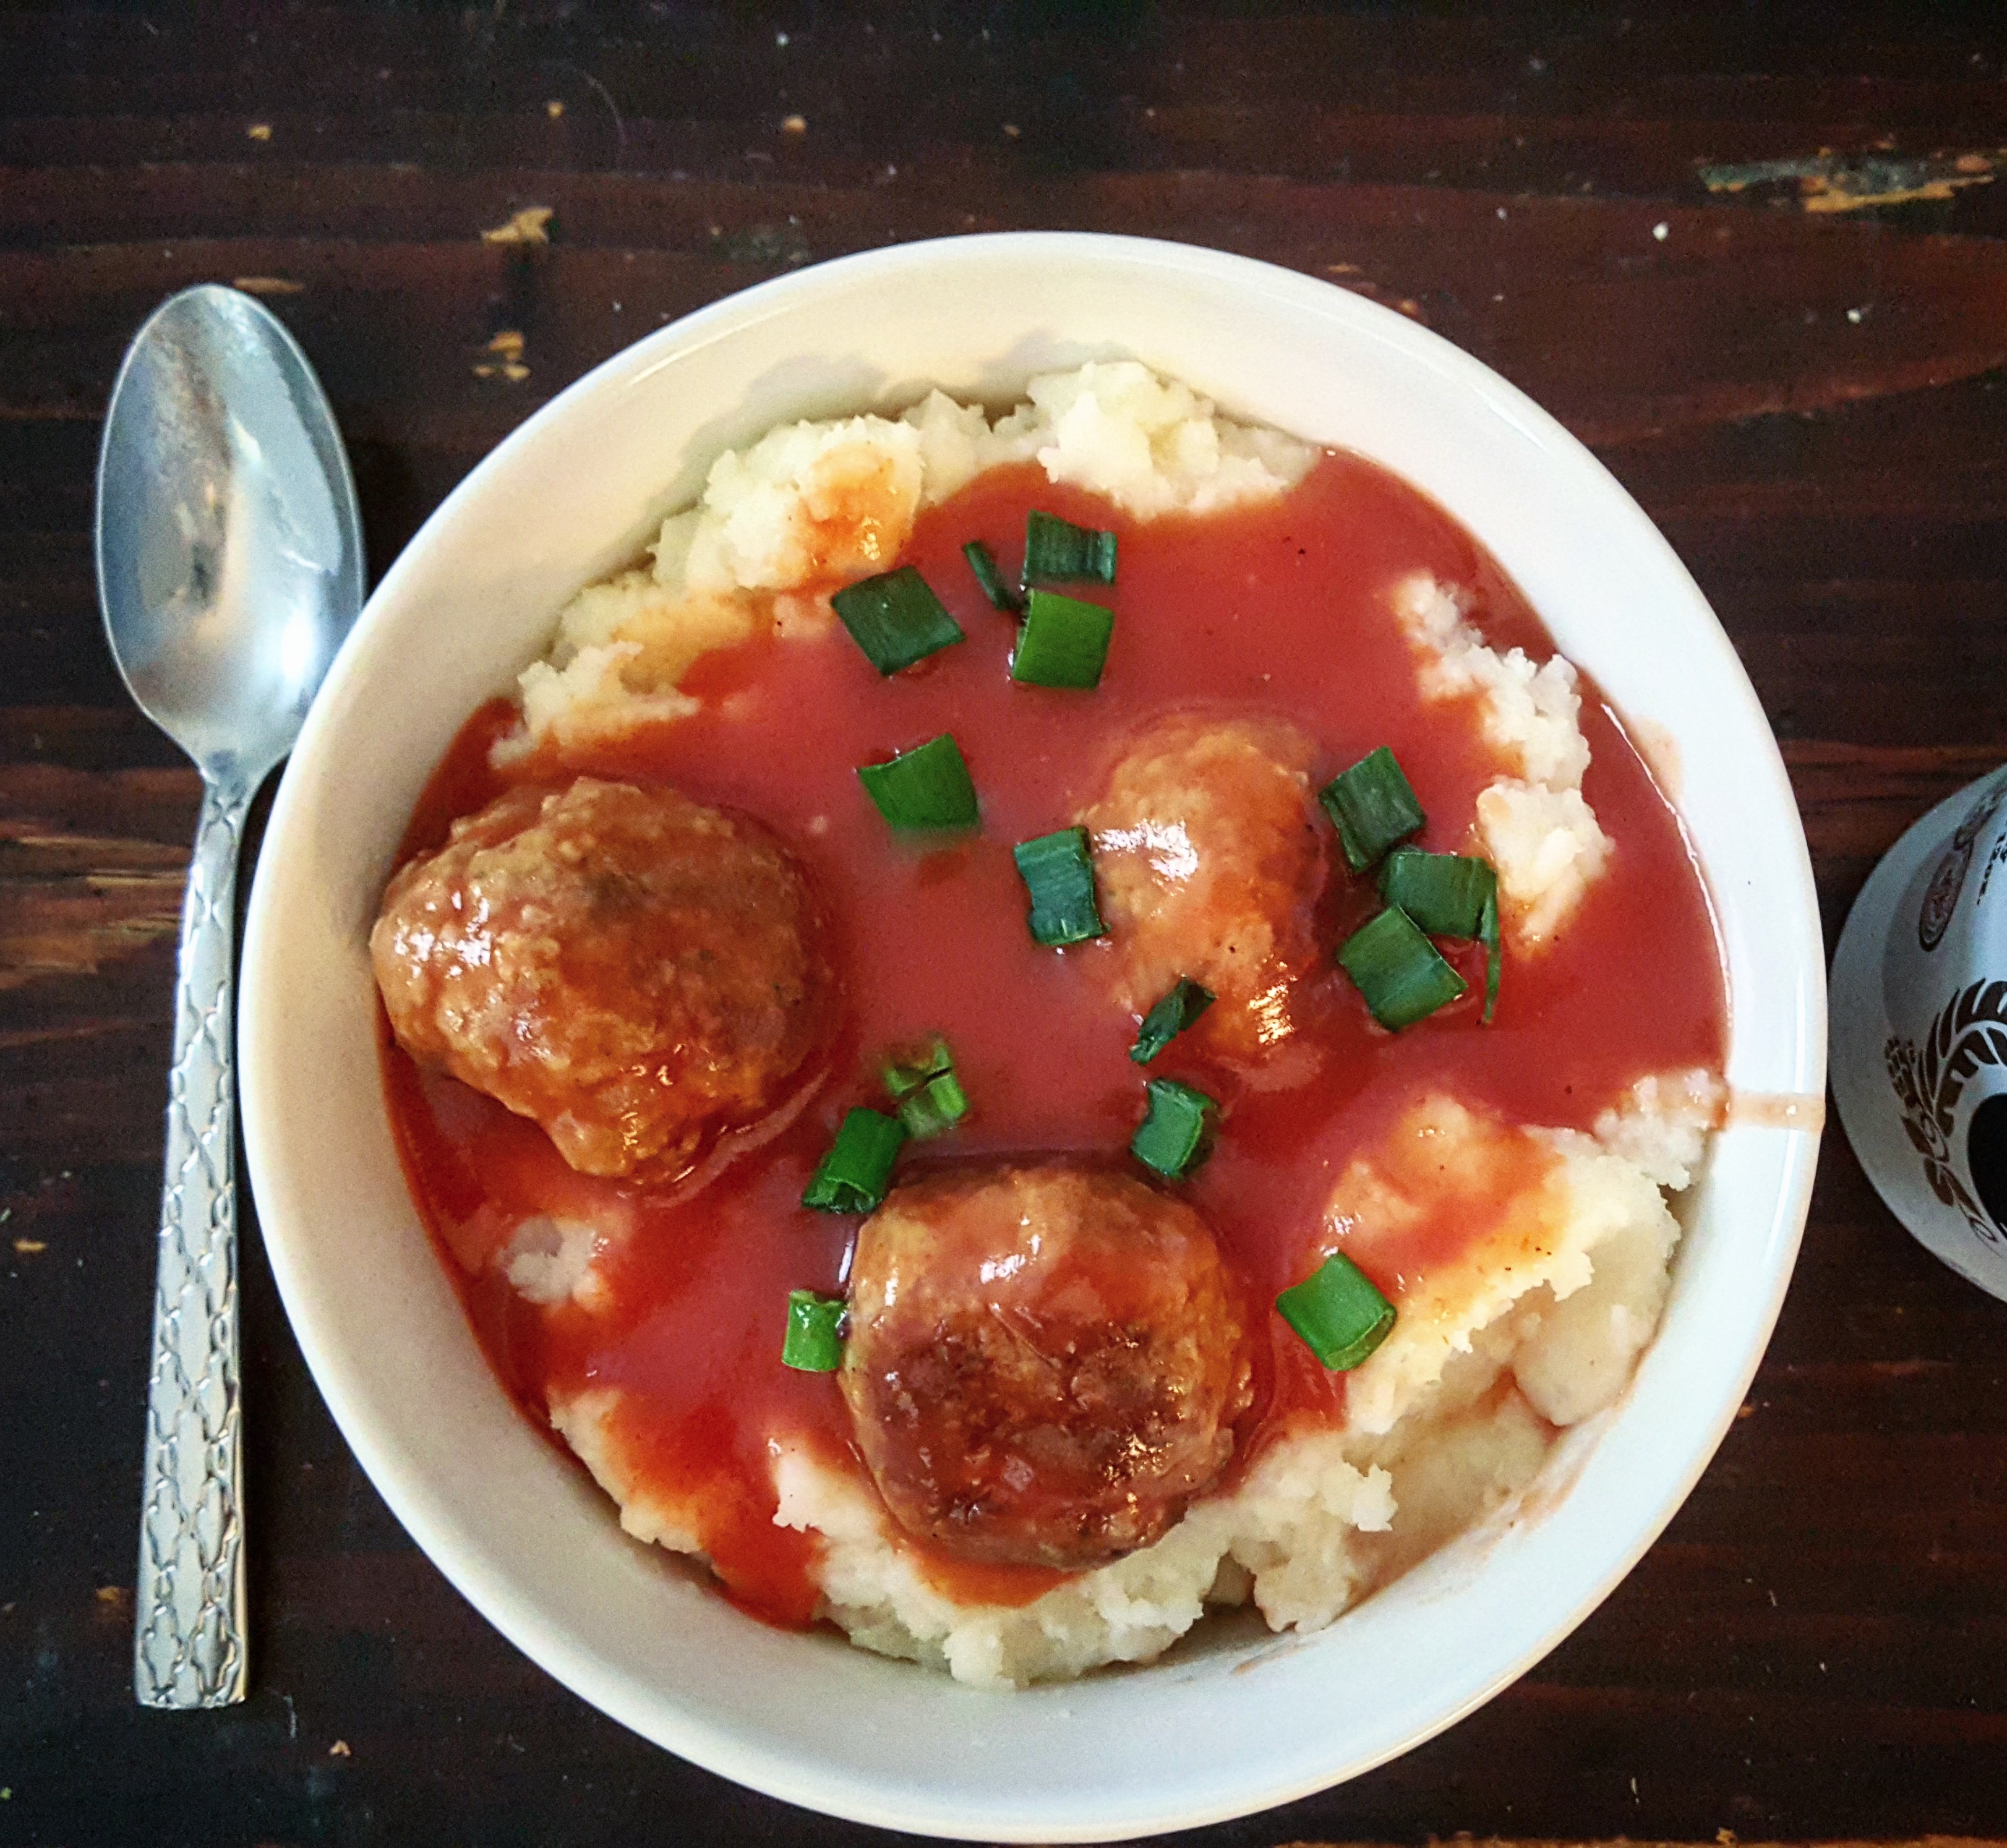 Meatball and mashed potatoes